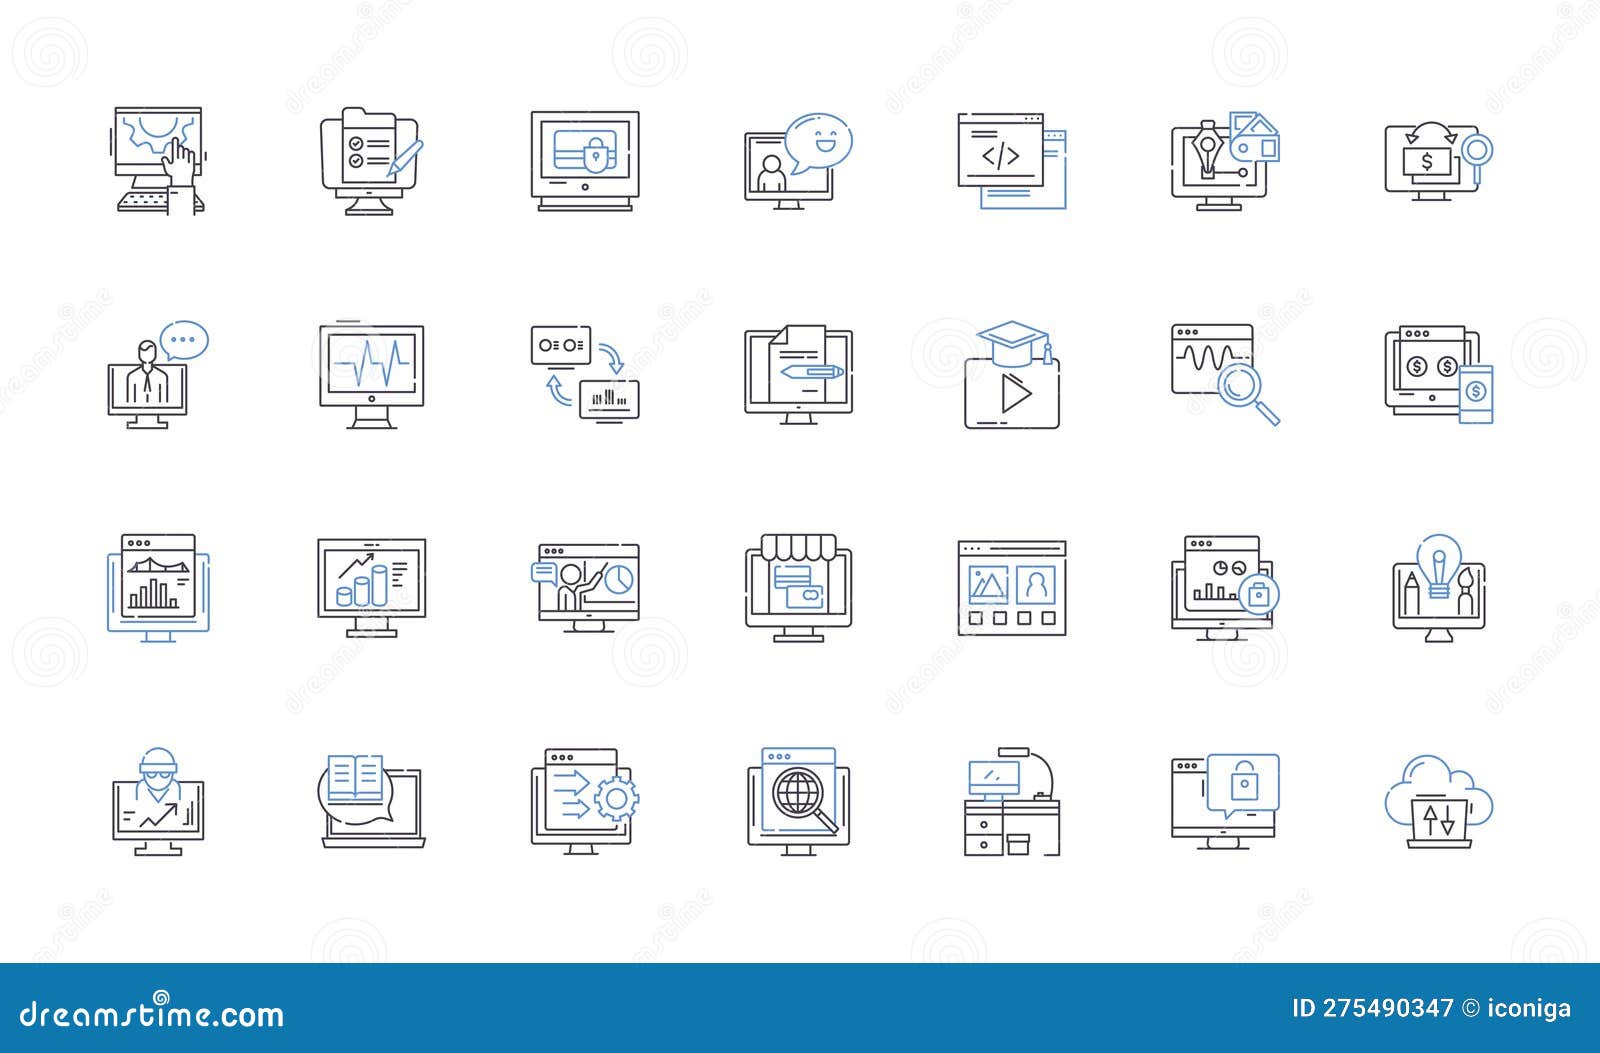 cyber security line icons collection. firewall, malware, encryption, passwords, hackers, phishing, identity  and